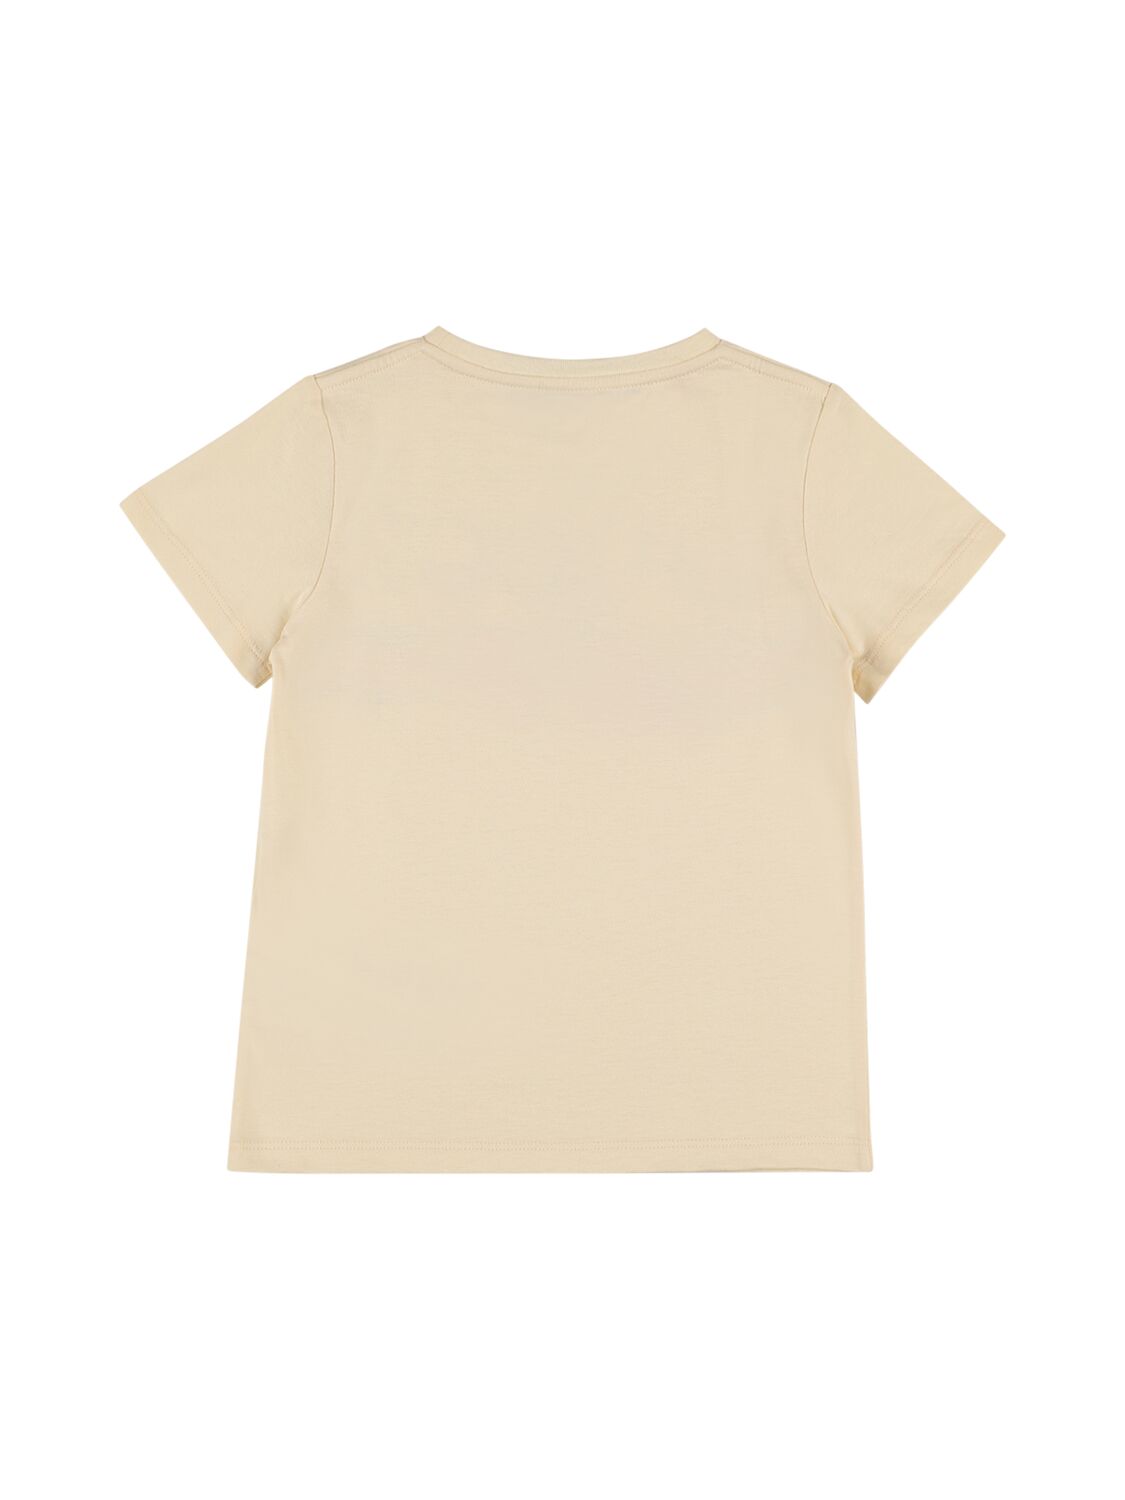 Shop Gucci Peter Rabbit Cotton Jersey T-shirt In Sunkissed,multi